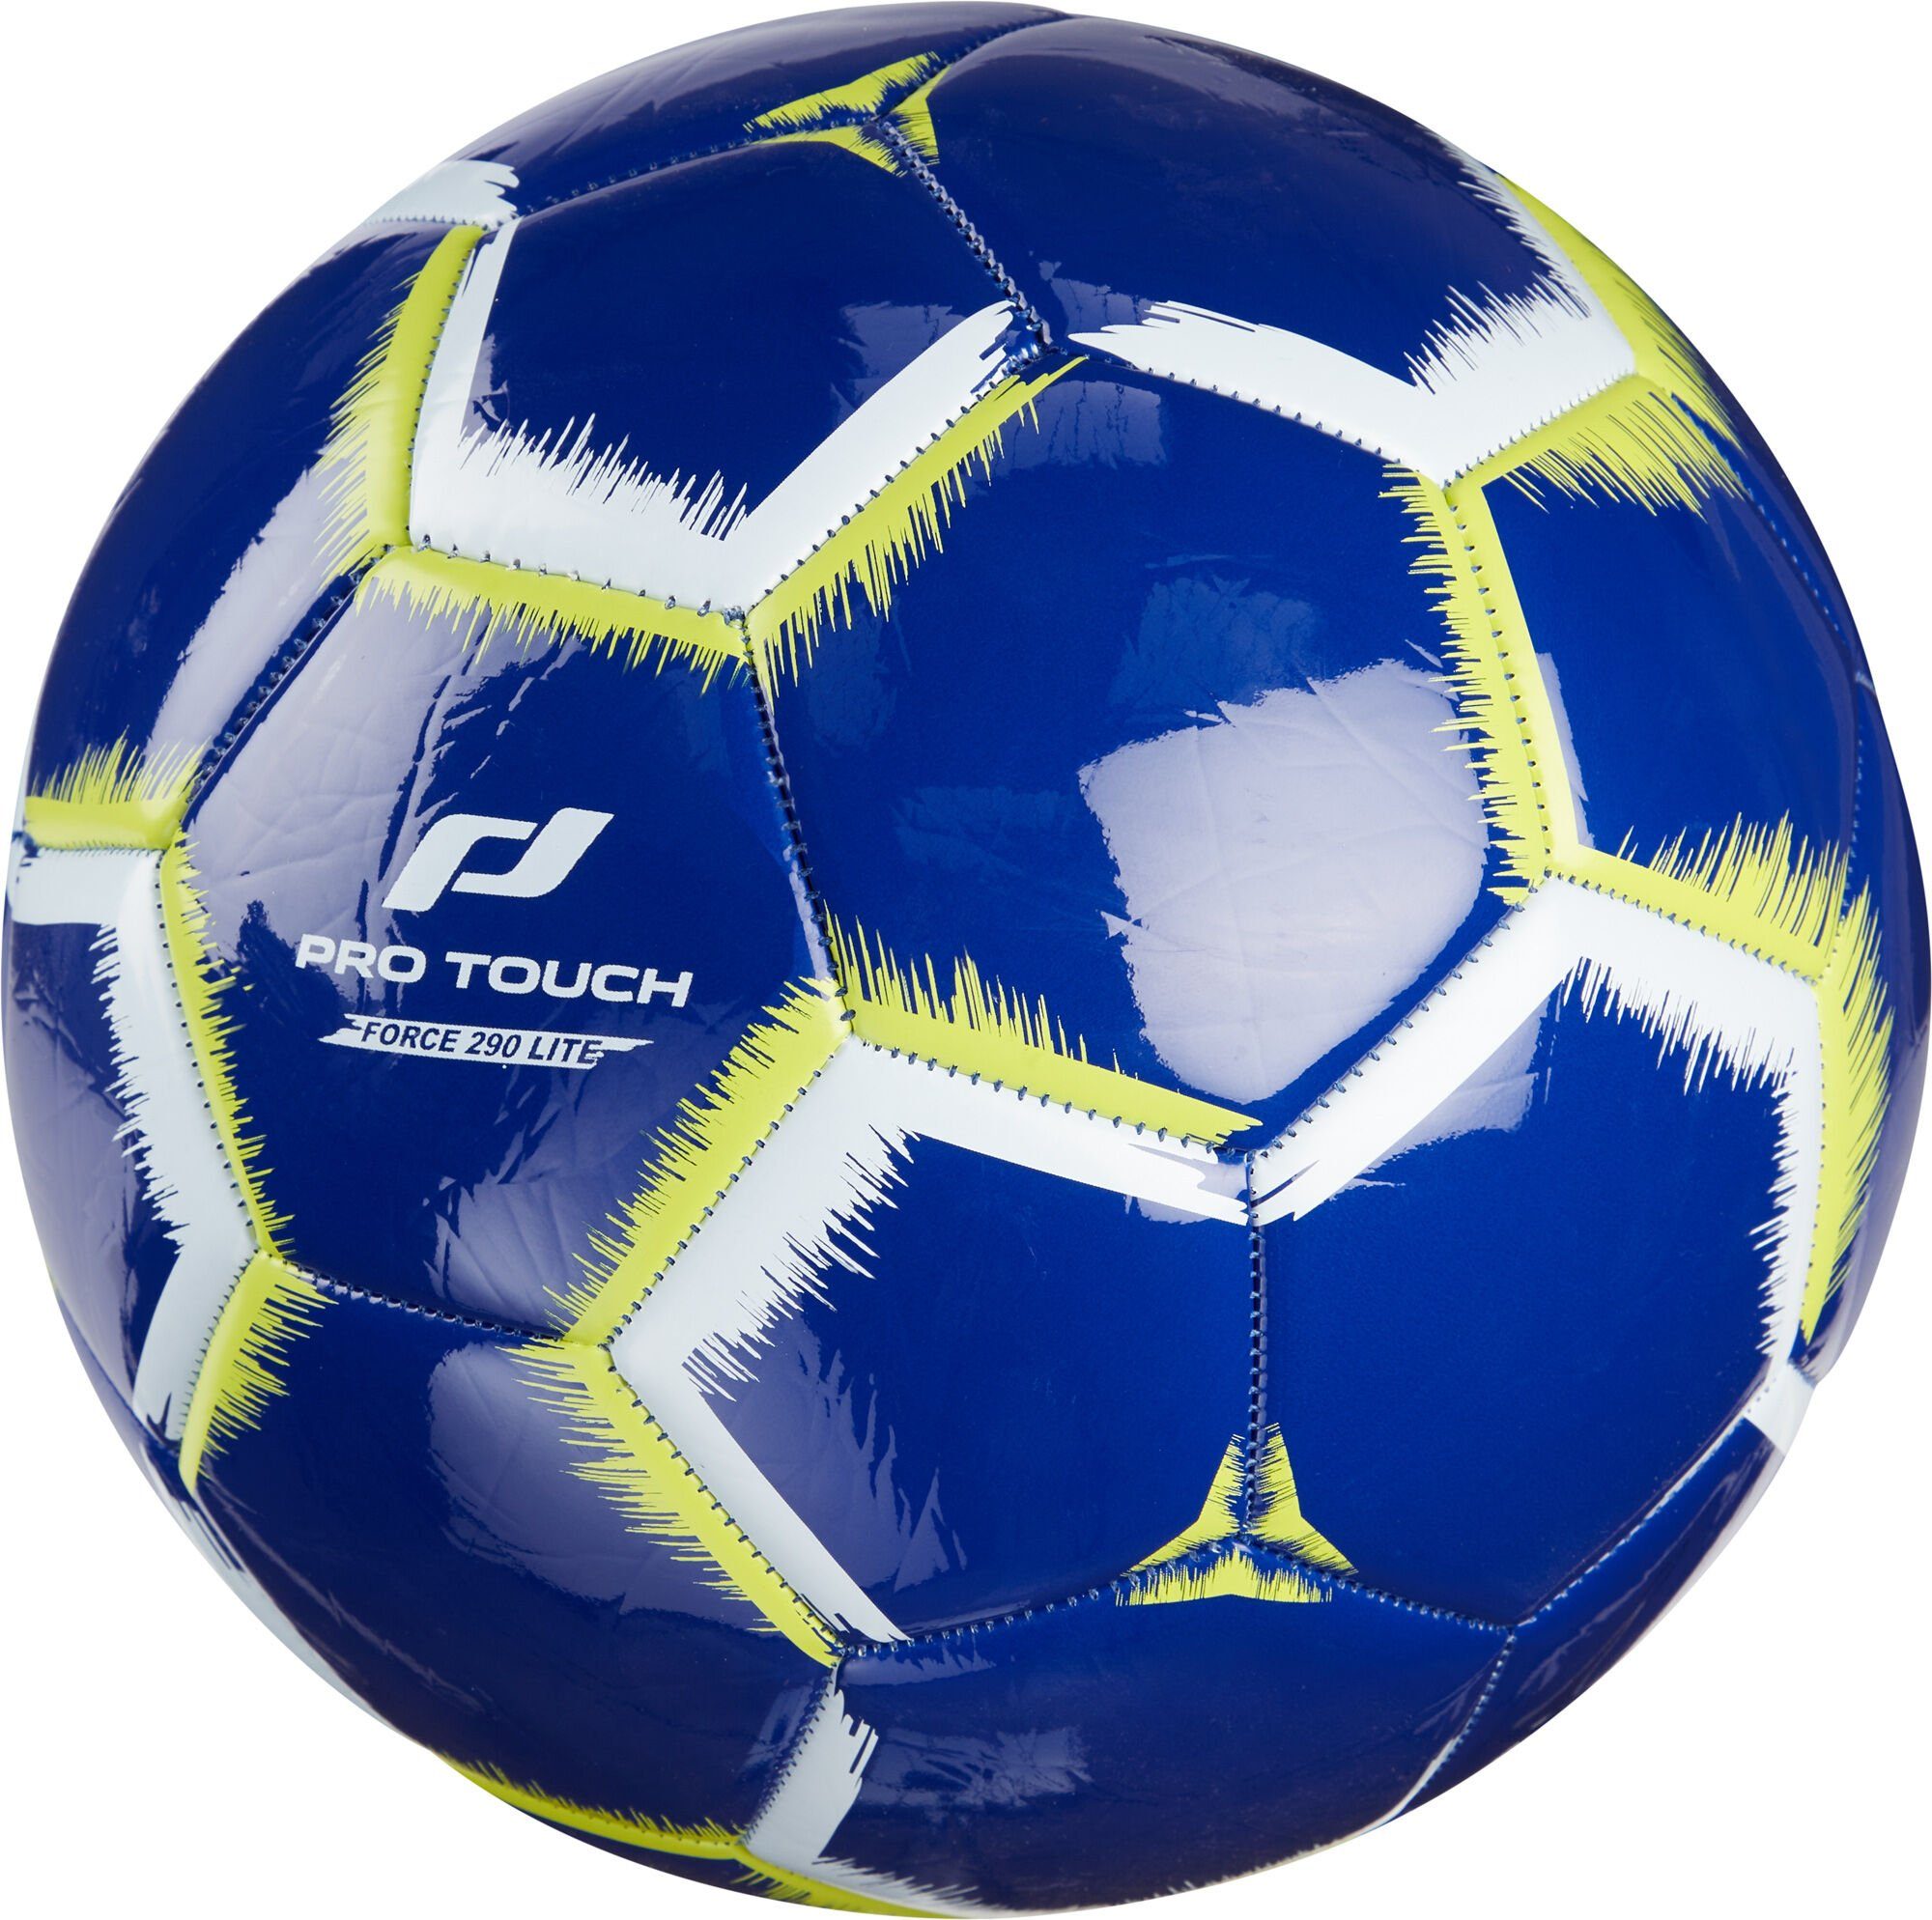 Pro Touch Fußball Fußball FORCE 290 Lite ANTHRACITE/TURQUOISE